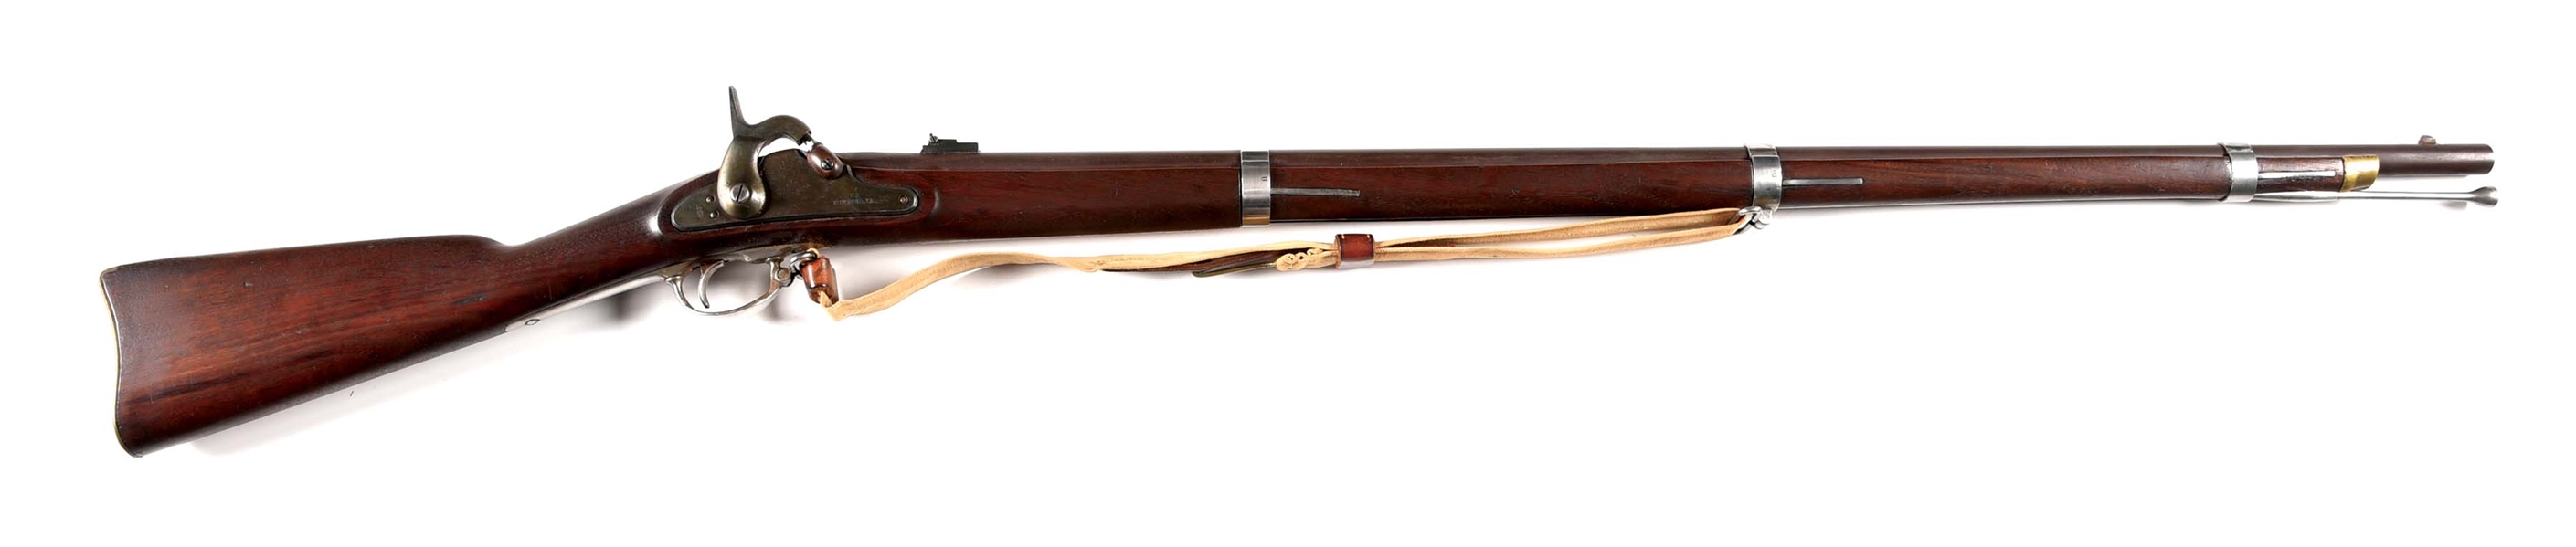 (A) REPRODUCTION C.S RICHMOND TYPE III 1863 PERCUSSION RIFLE MUSKET.